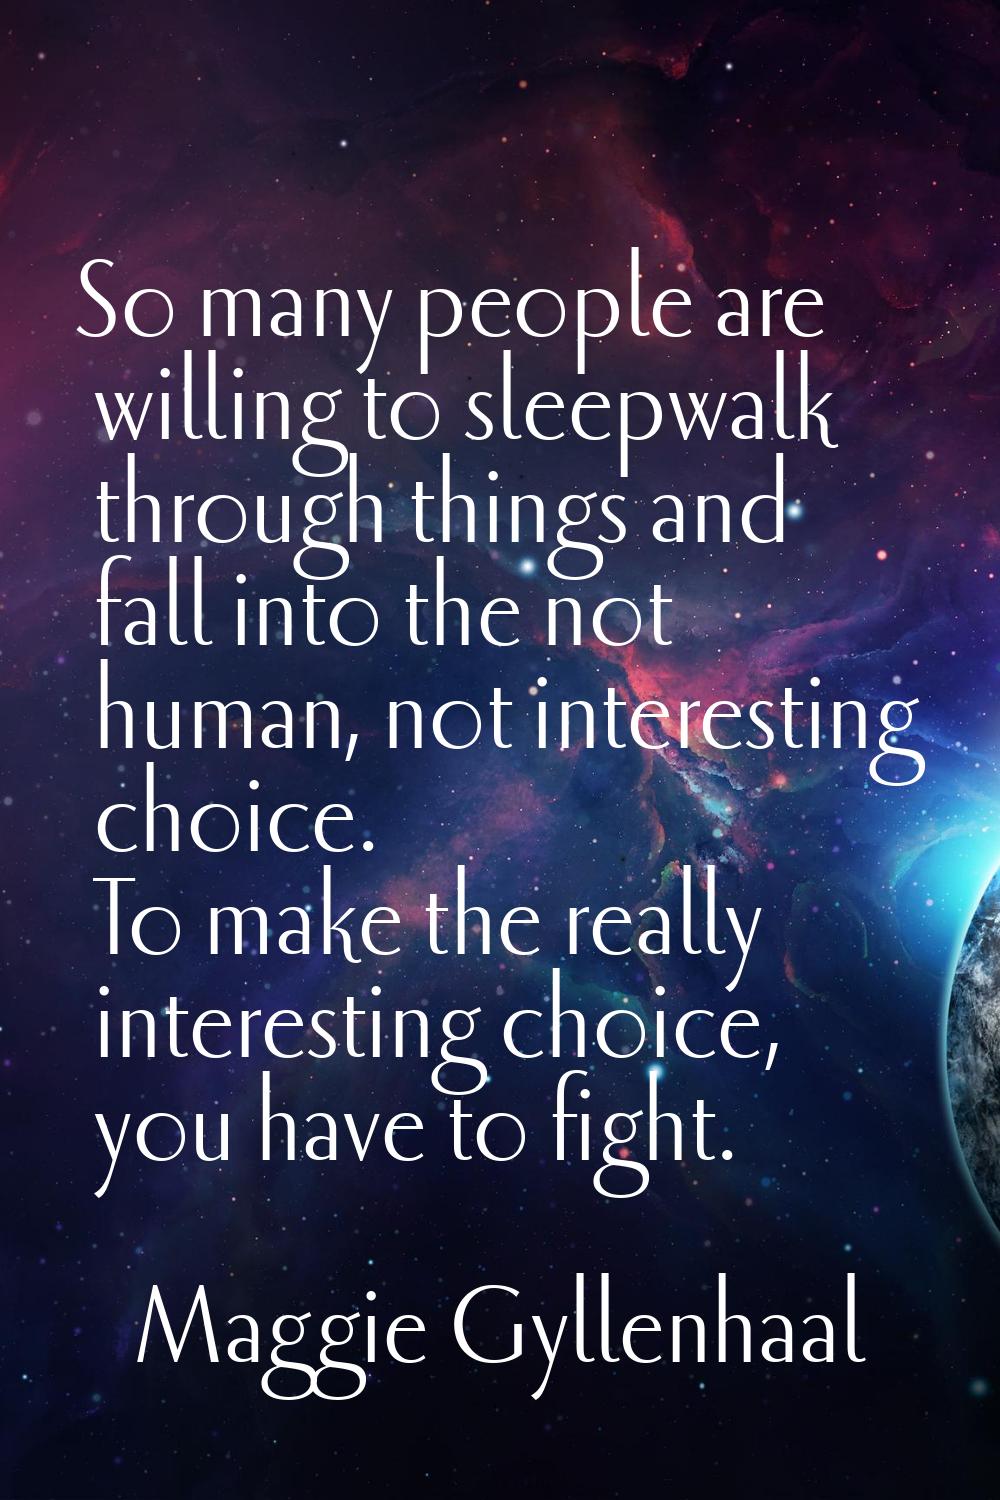 So many people are willing to sleepwalk through things and fall into the not human, not interesting